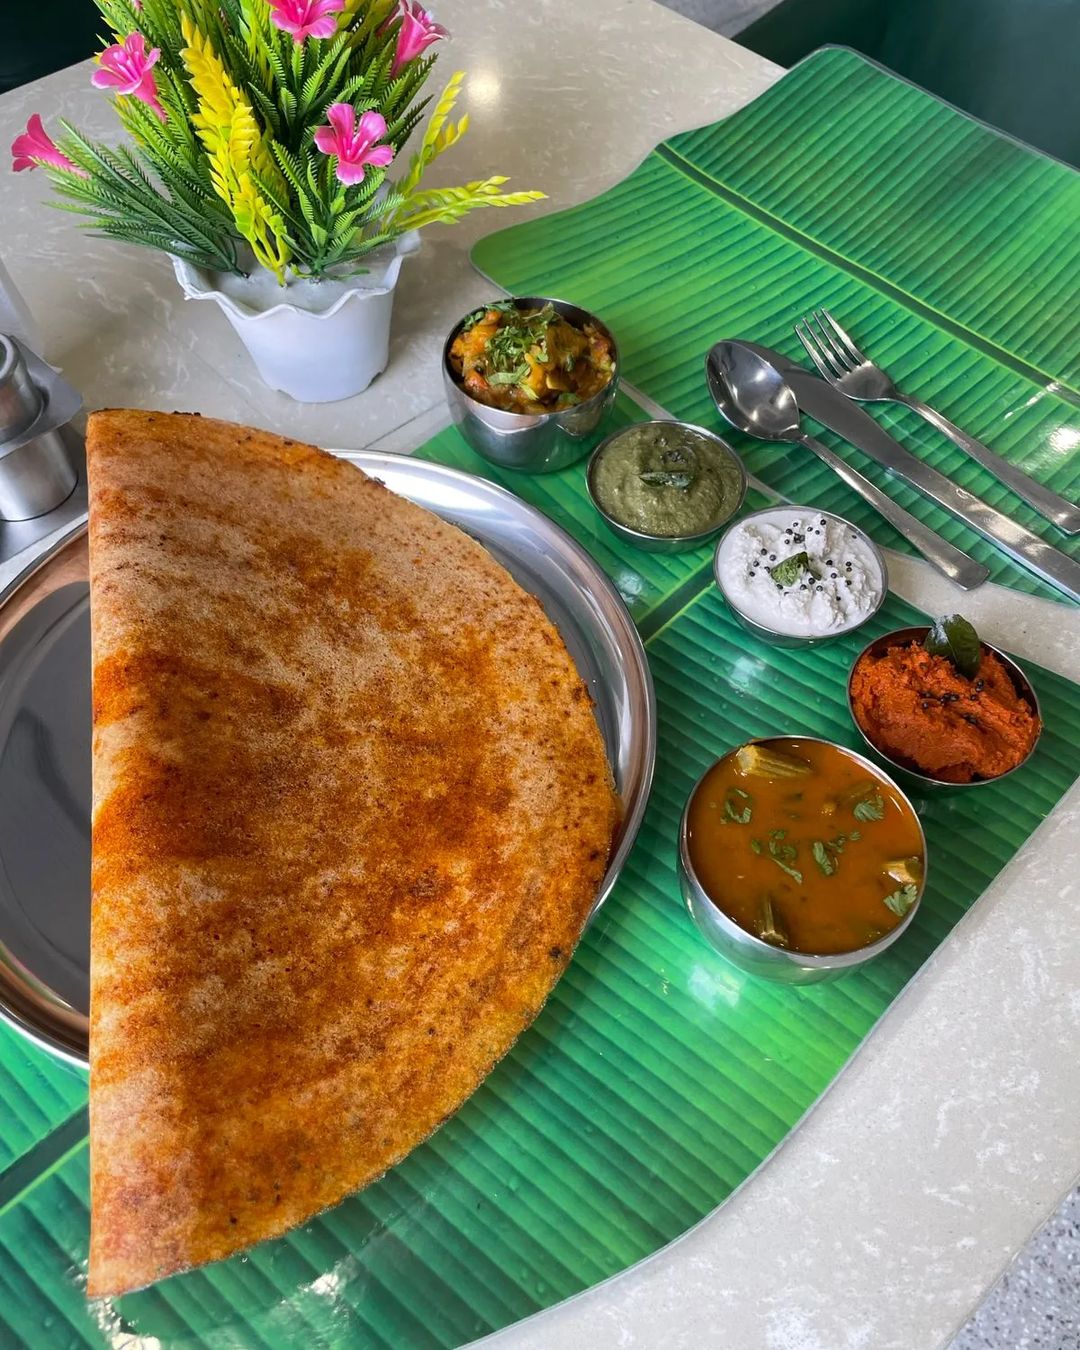 Masala dosa and sambar is one of the most common breakfast in India